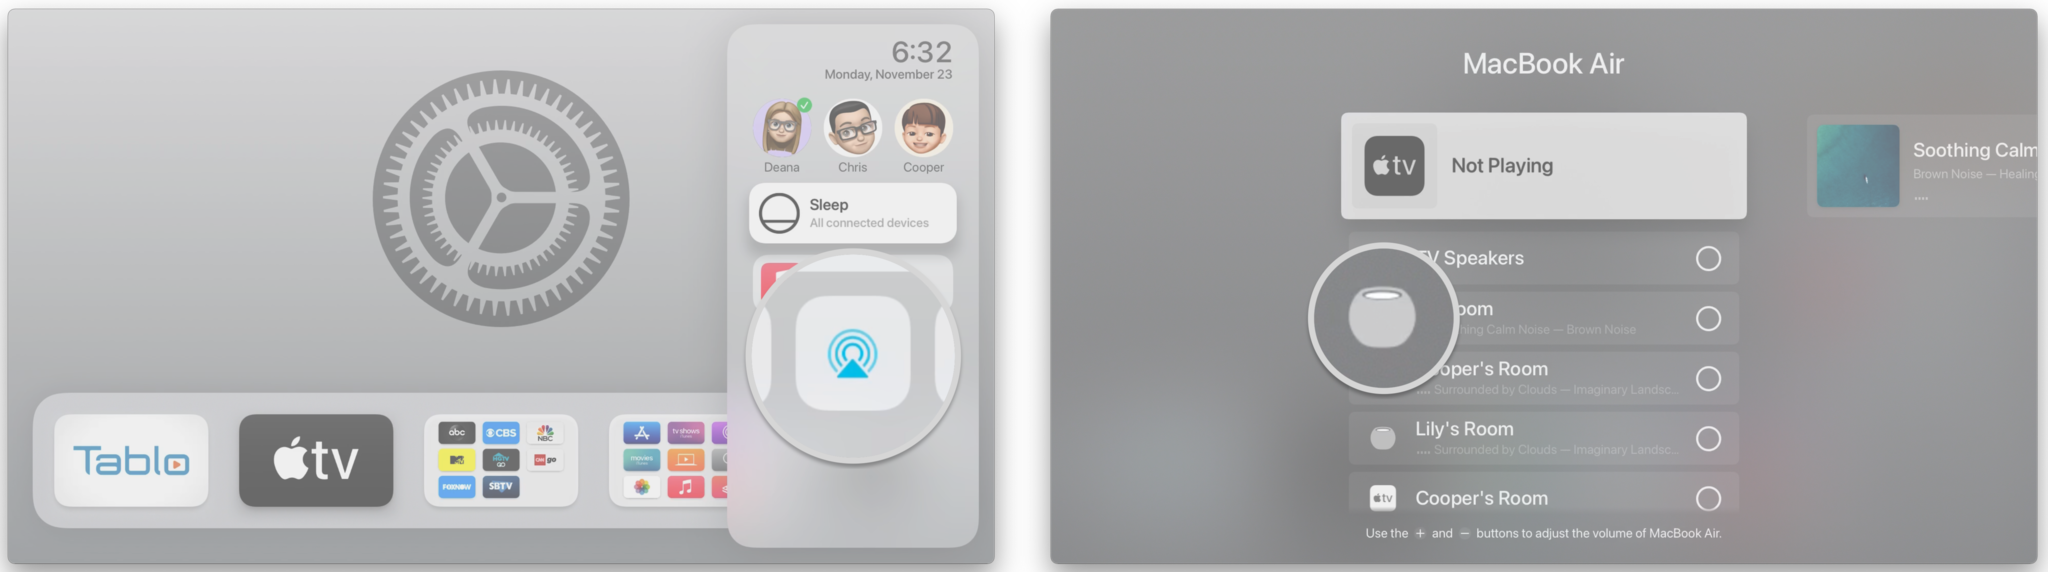 How to set up HomePod or HomePod mini with Apple TV via AirPlay: Hold down the Home button on the Siri remote for 3 seconds, Click the AirPlay icon, Select your HomePod with a click